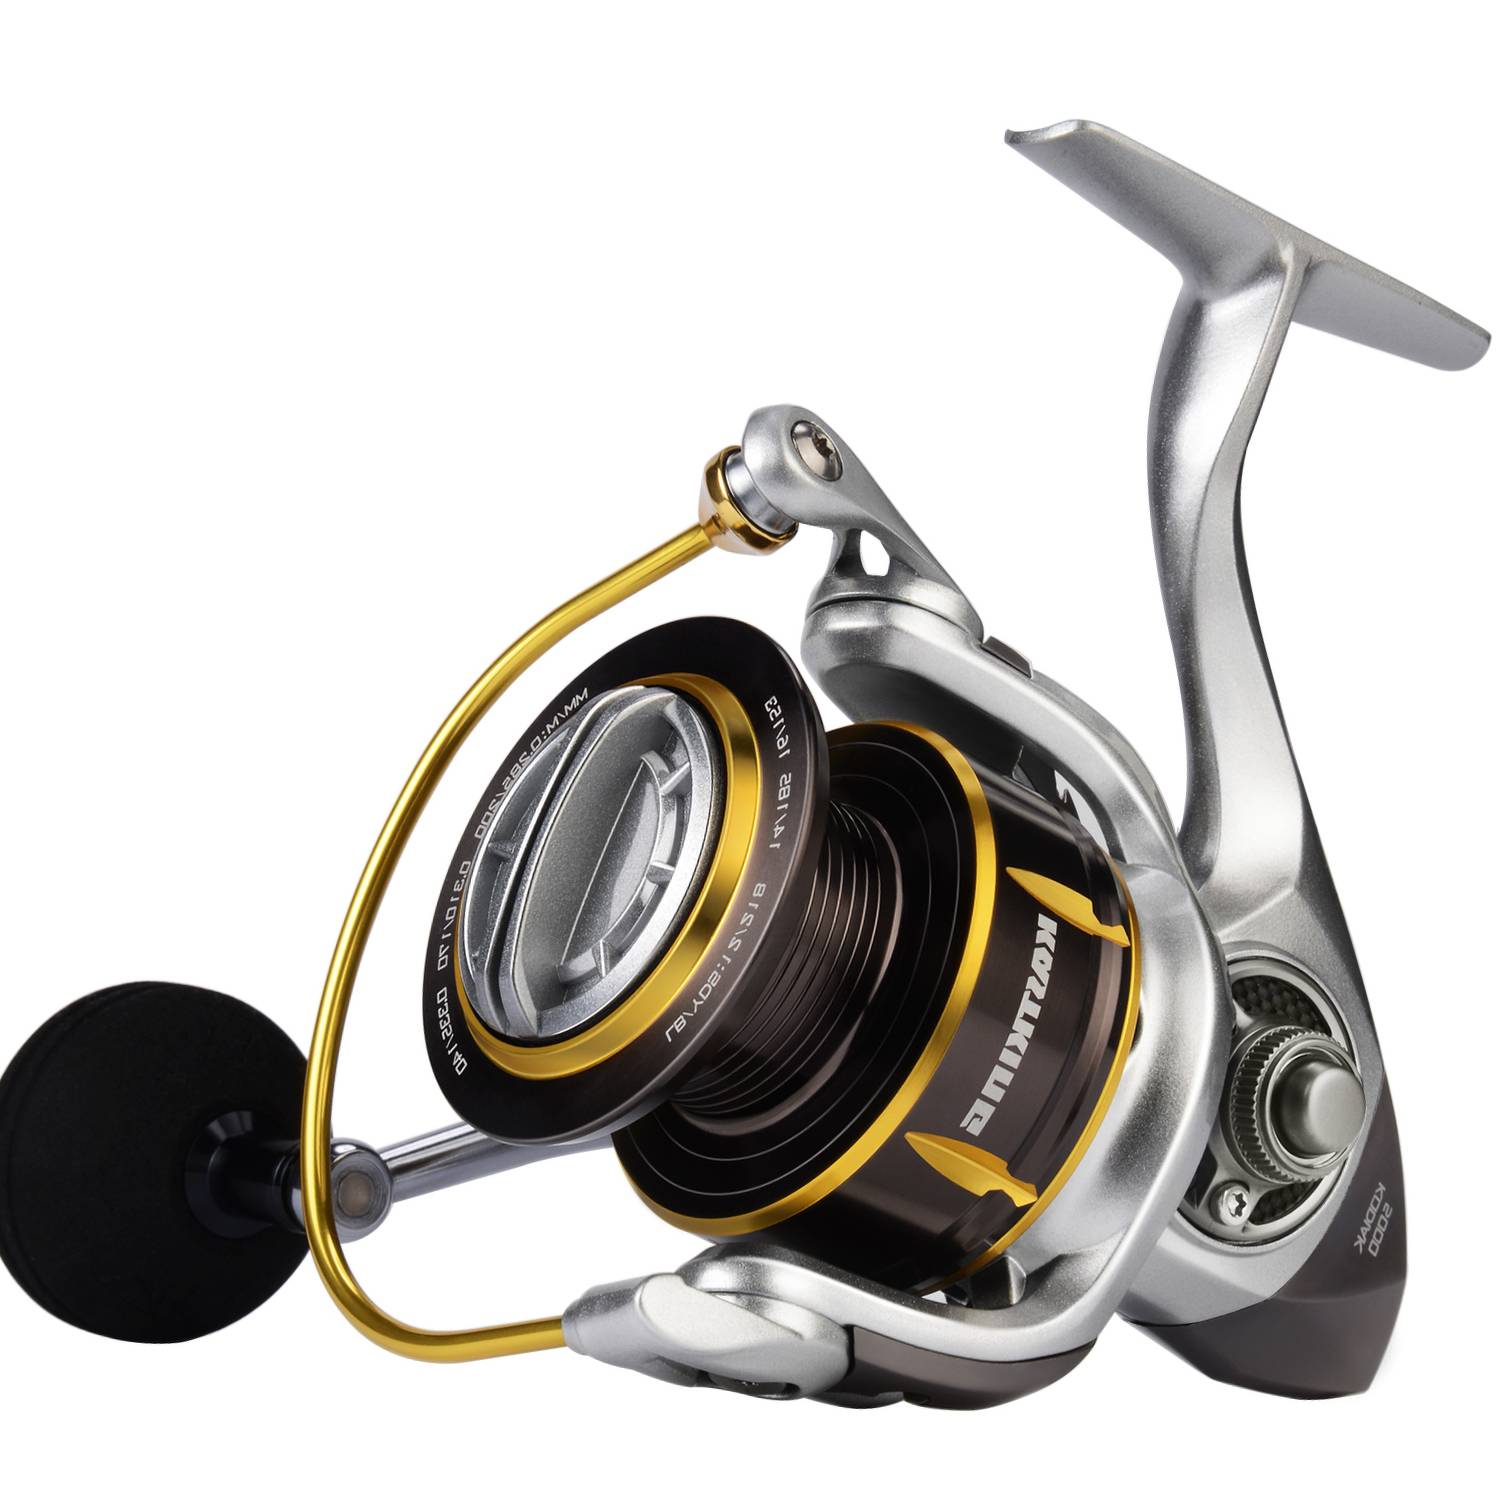 Top 7 Cheapest spinning reels in 2019